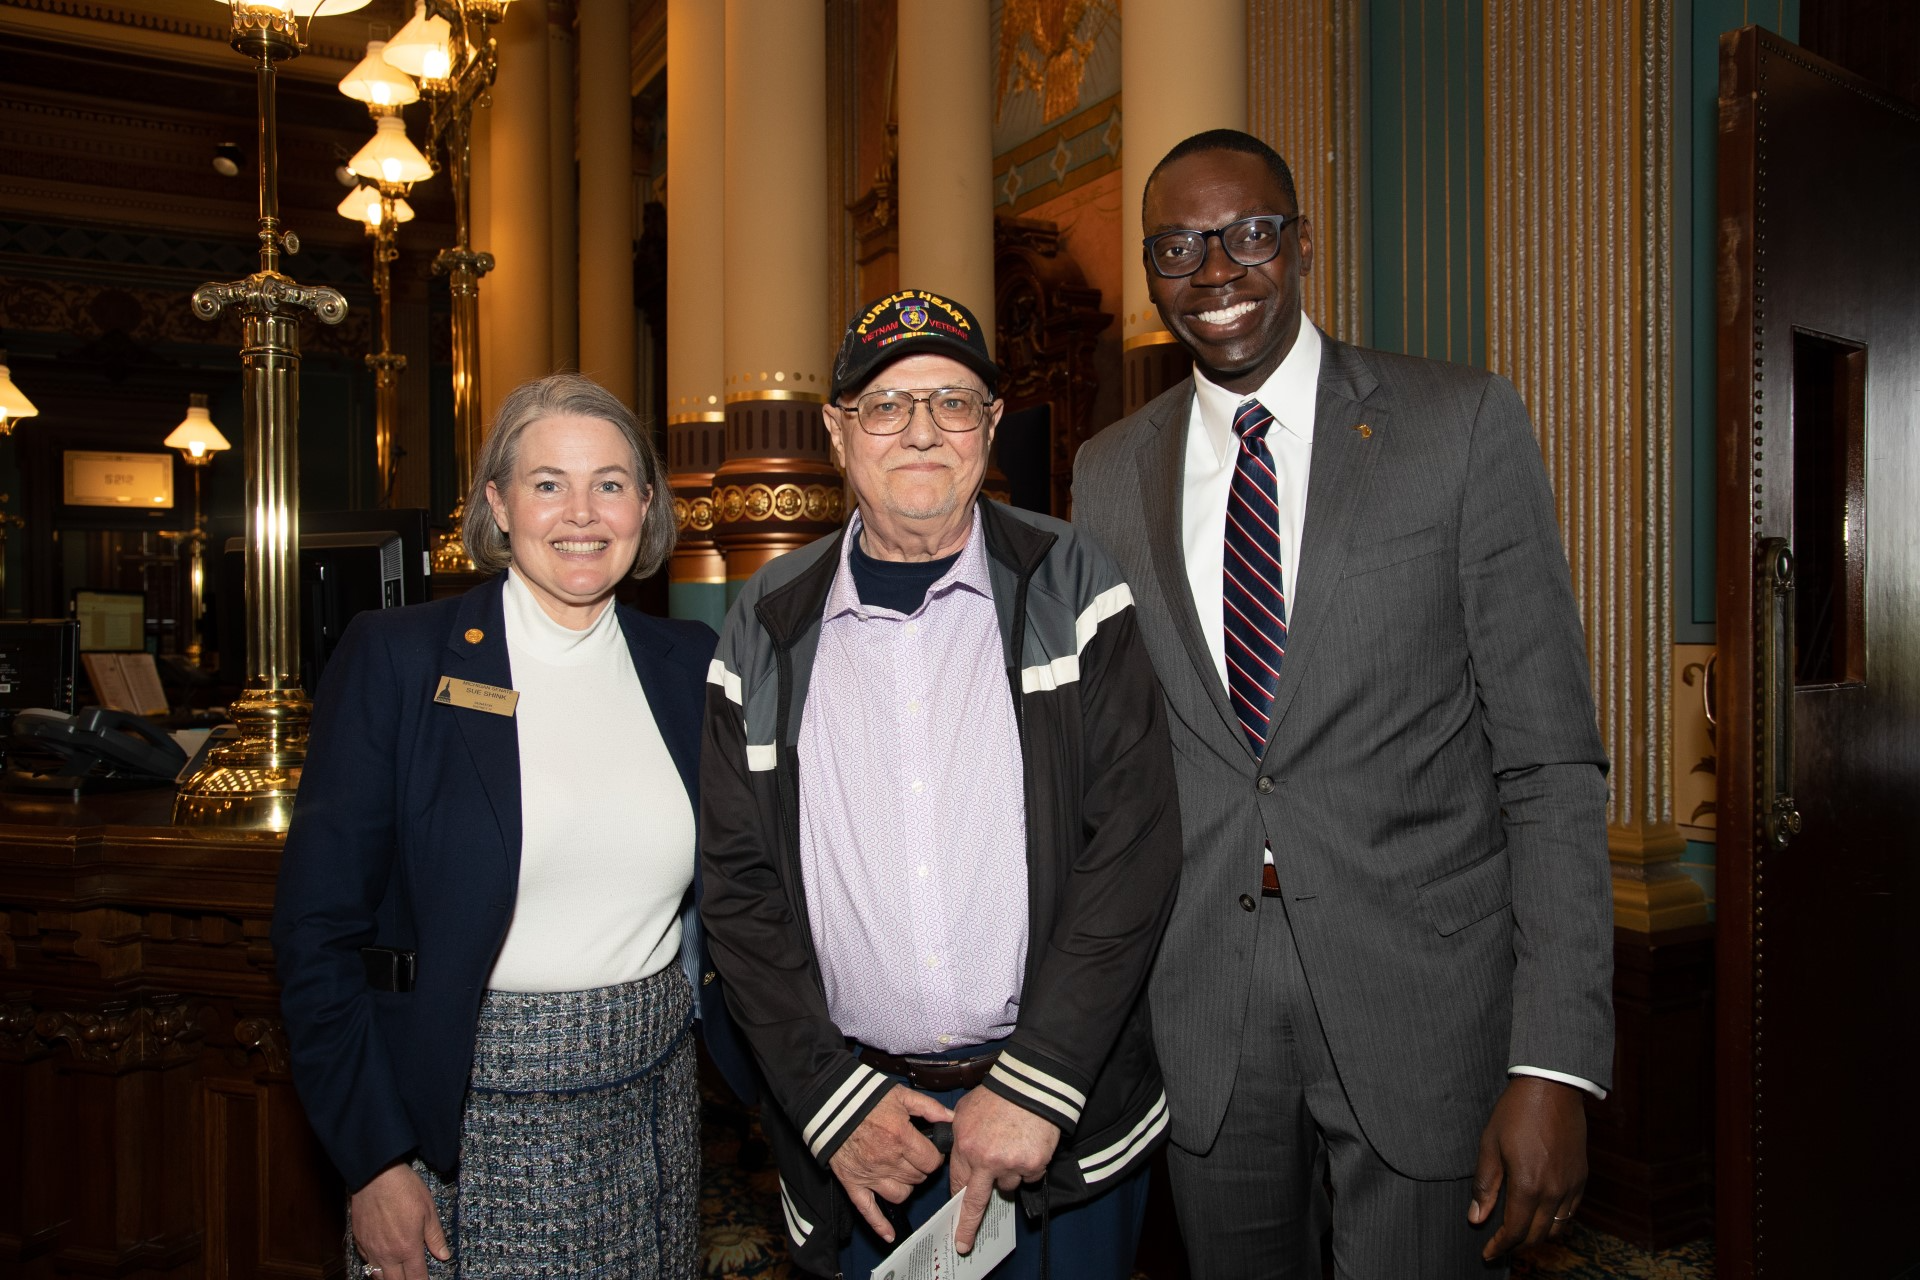 Potential Caption: Sen. Sue Shink (D-Northfield Twp.), Sen. Shink's guest, Navy Vietnam Veteran and Jackson County resident Donald Bliss, and Lt. Gov. Garlin Gilchrist II are pictured on the Senate floor following the Michigan Senate's 28th Annual Memorial Day Ceremony on Thursday, May 25, 2023.